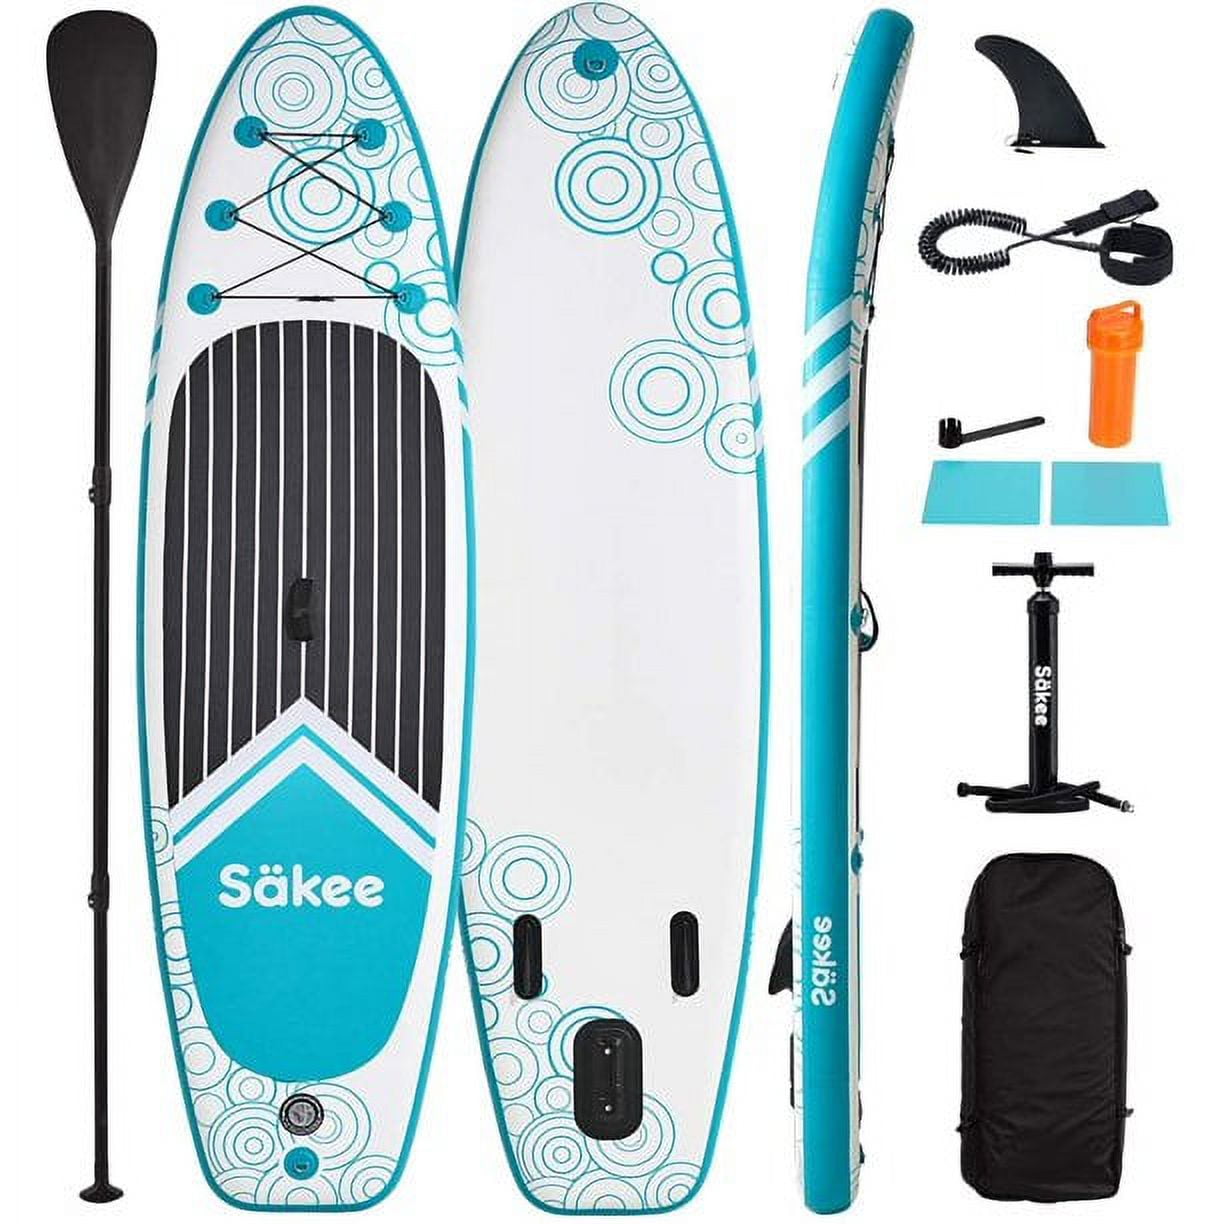 SÄKEE 10FT Inflatable Stand Up Paddle Board with Premium SUP Accessories,  Fit for Youth & Adult Paddleboard | SUP-Boards